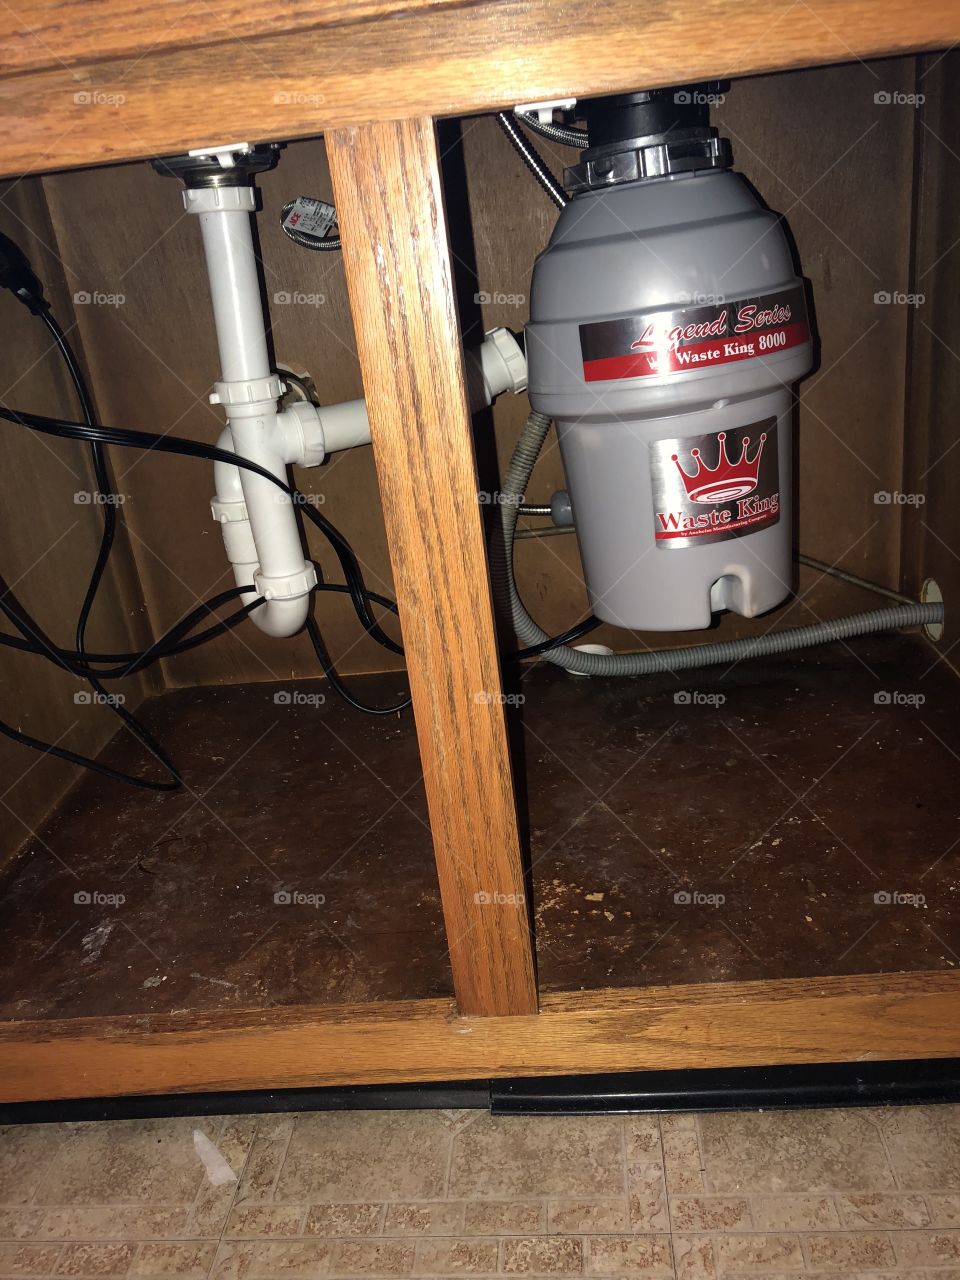 Recently installed garbage disposal unit